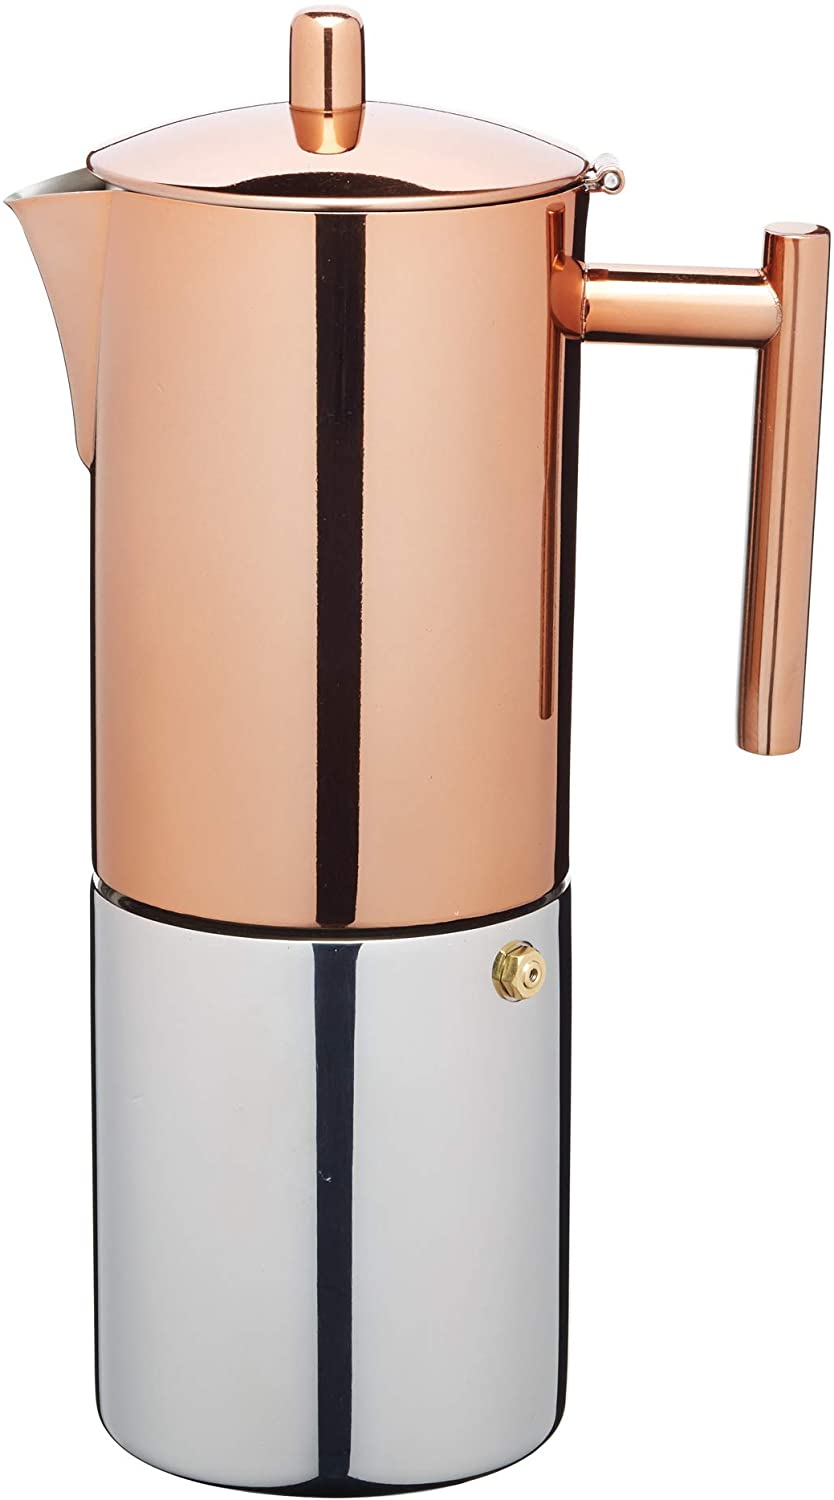 Kitchen Craft KCLXCOF10CUP Le Xpress Espresso Maker for 10 Cups Stainless Steel / Copper 12 x 17 x 22 cm Brown/Grey